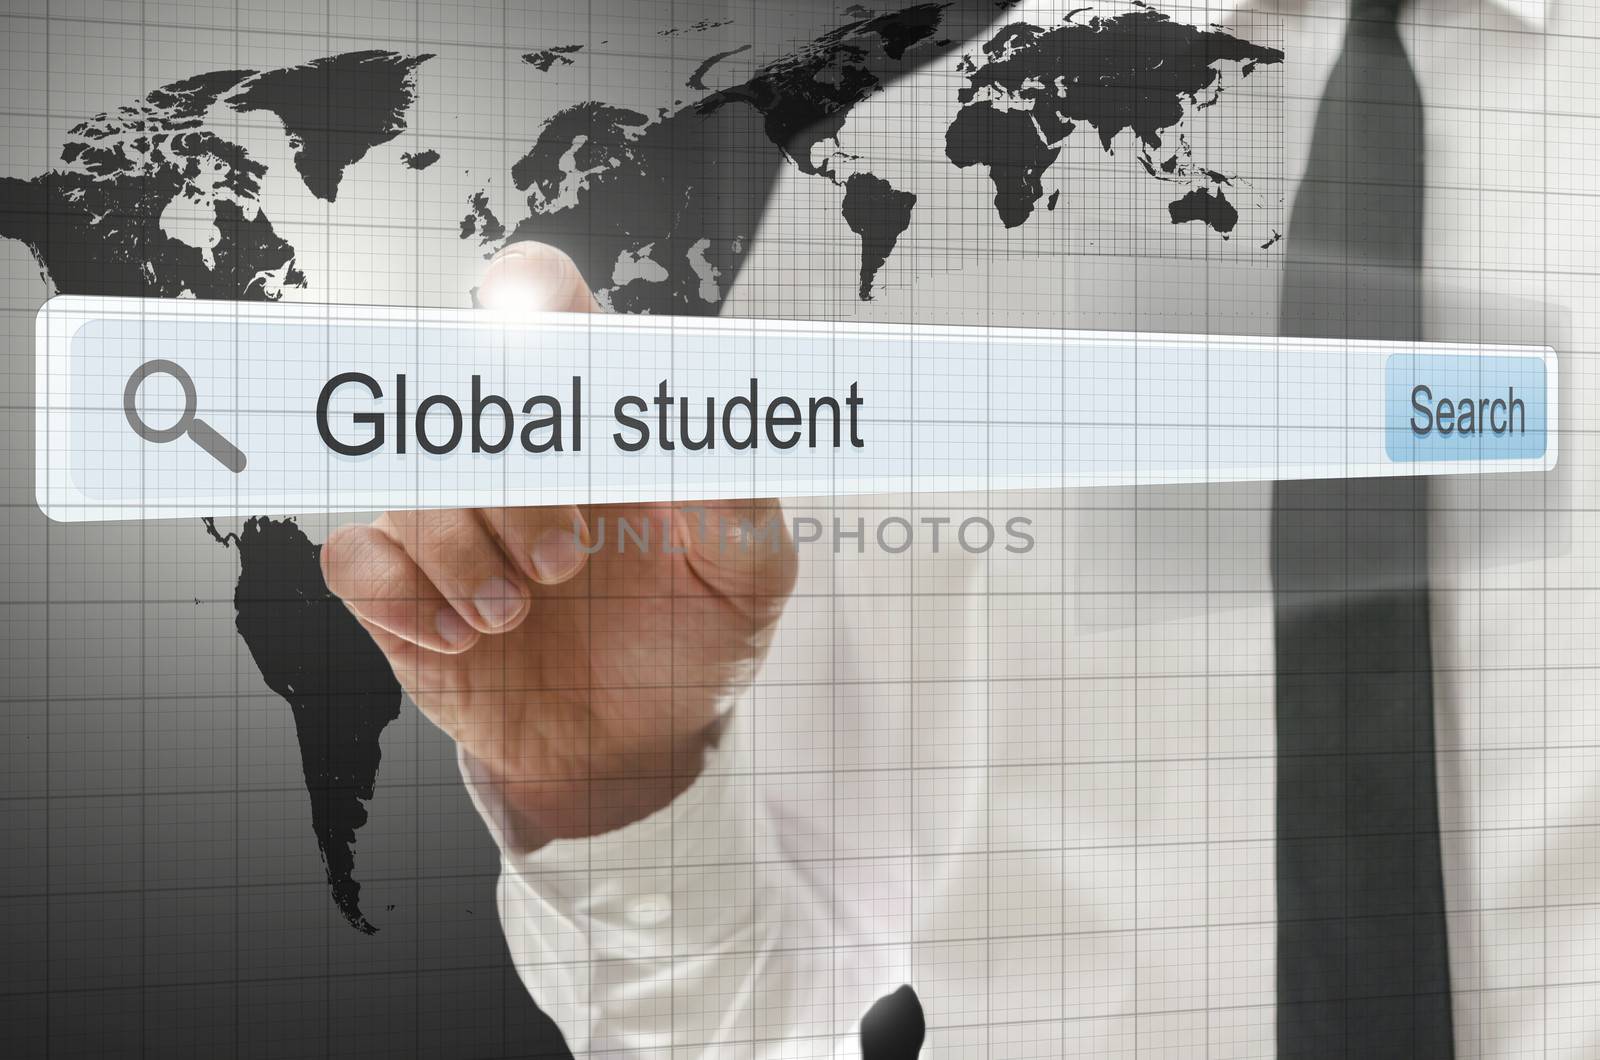 Global student written in search bar by Gajus